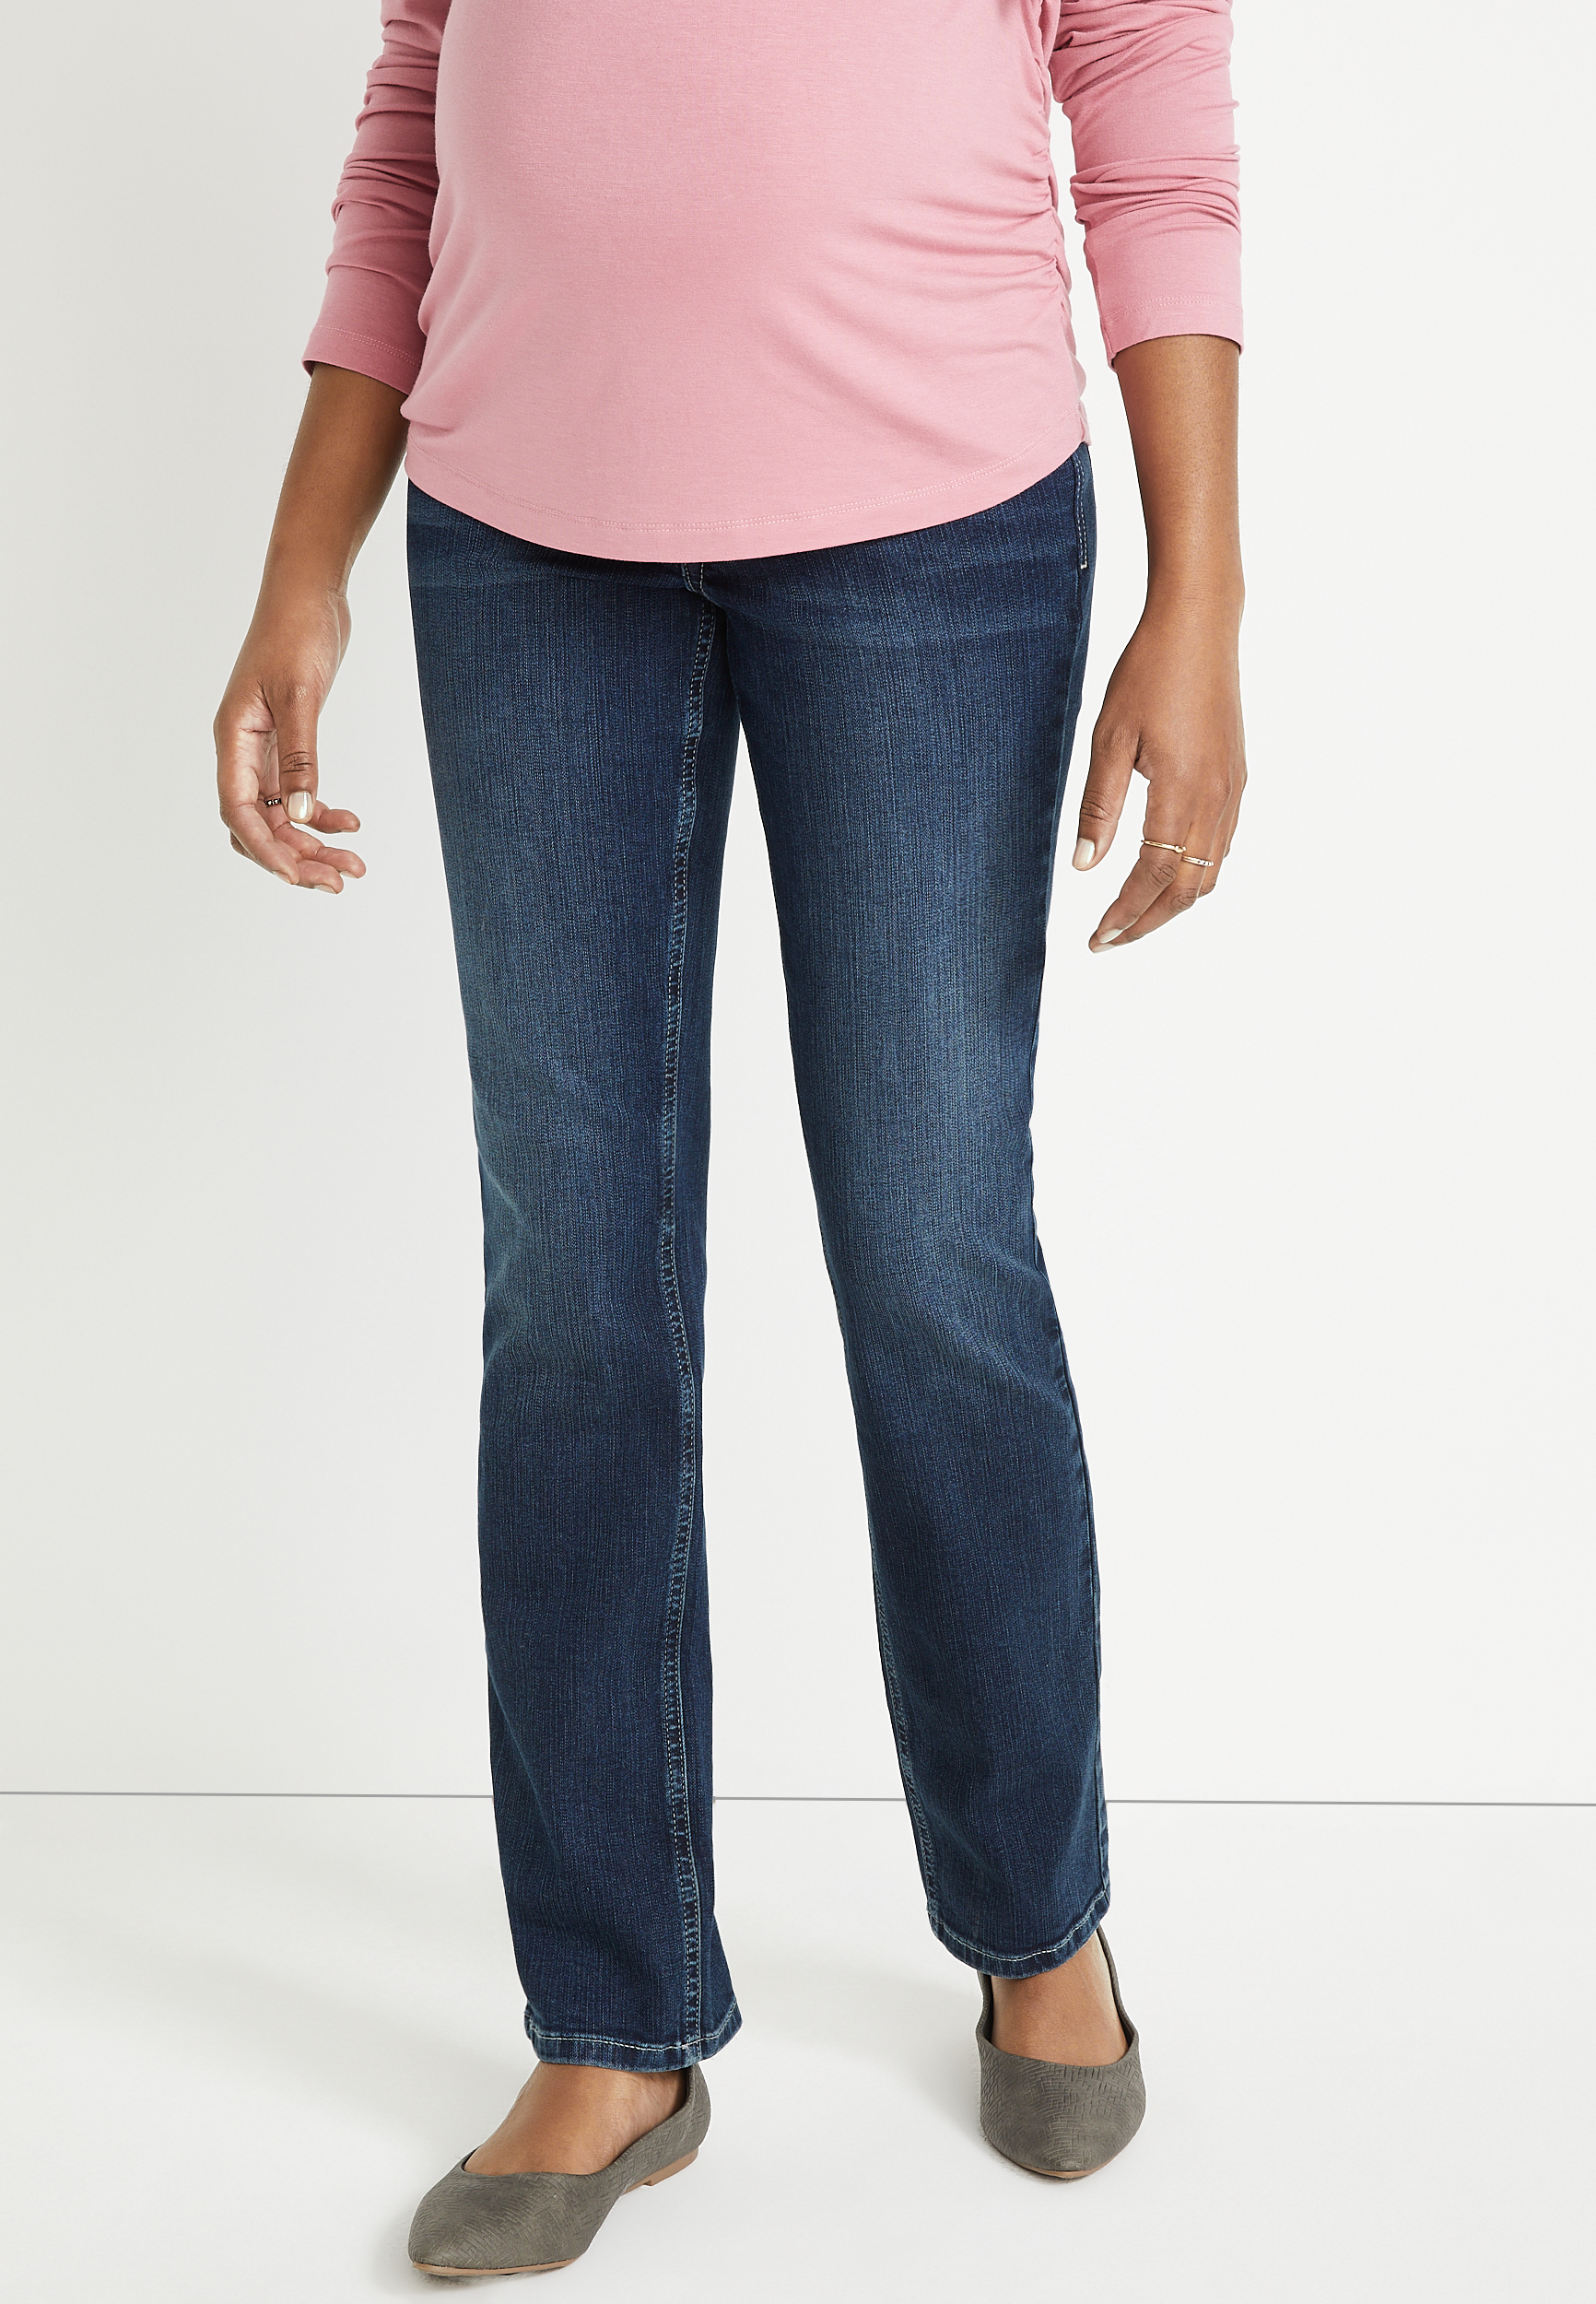 Apt. 9 ••Maternity/ Postpartum Jeans Size undefined - $11 - From Emily